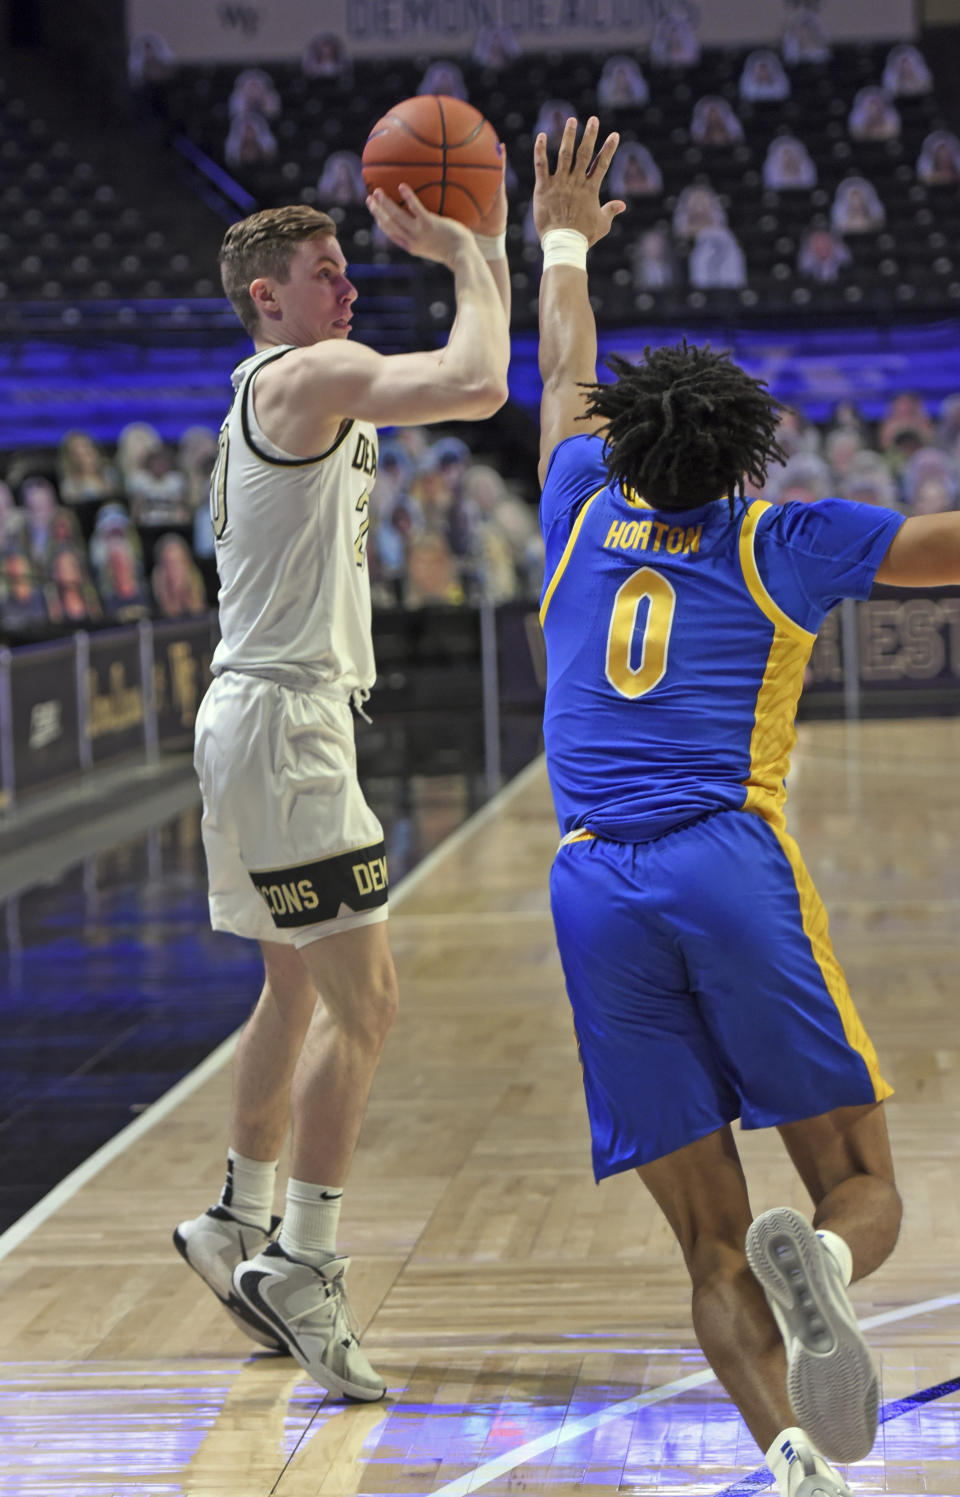 Wake Forest's Jonah Antonio sinks a 3-point shot under pressure from Pittsburgh's Ithiel Horton during an NCAA college basketball game Saturday, Jan. 23, 2021, in Winston-Salem, N.C. (Walt Unks/The Winston-Salem Journal via AP)